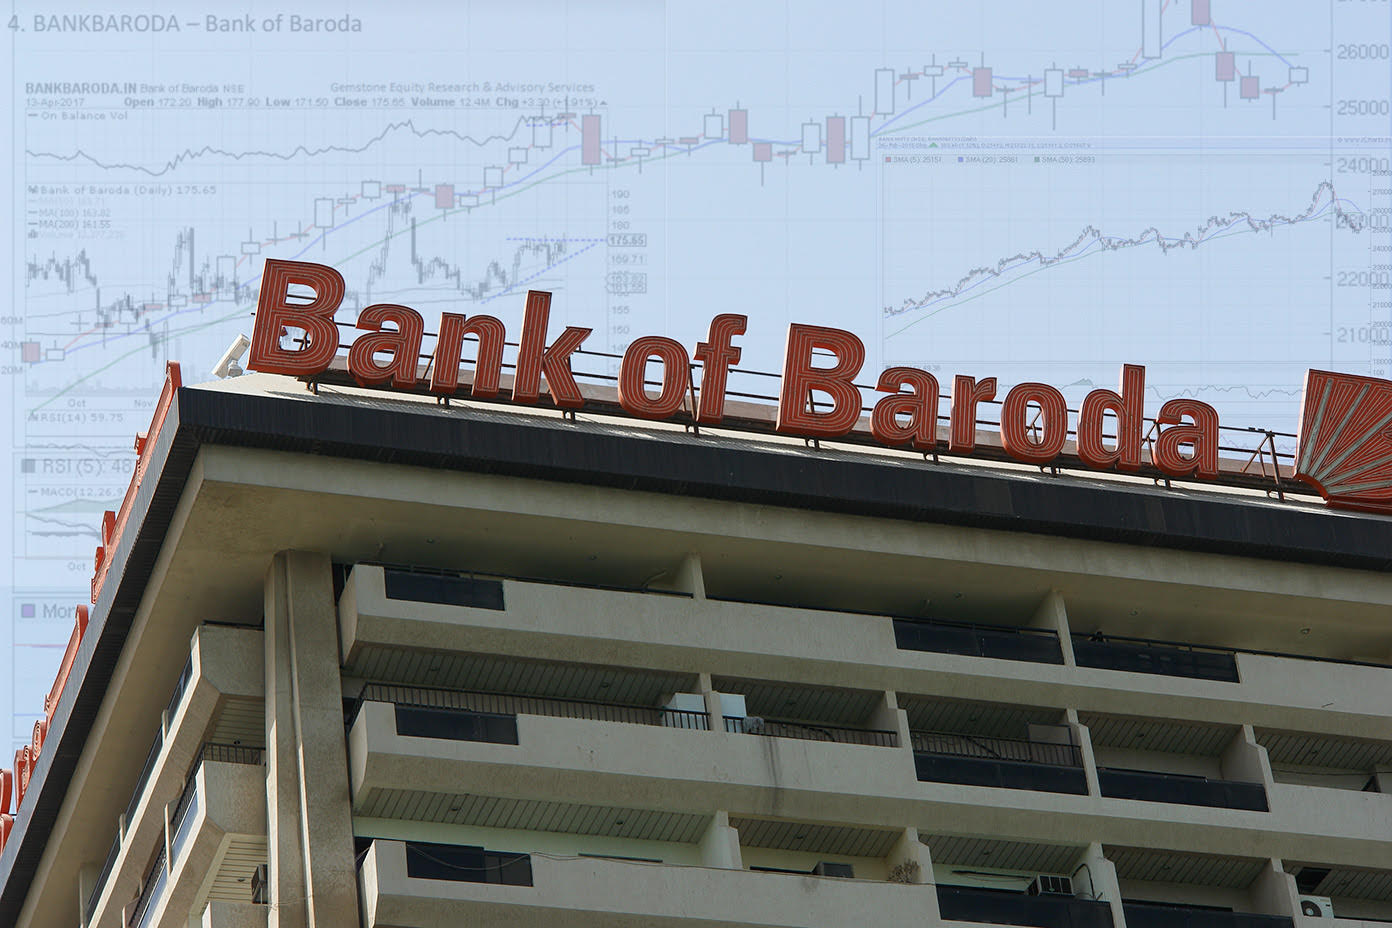 OCCRP presents data from its investigation into the role of the Bank of Baroda in South Africa’s Gupta scandal, detailing transfers involving companies owned or controlled by the brothers. Photo: OCCRP. Some rights reserved.]]